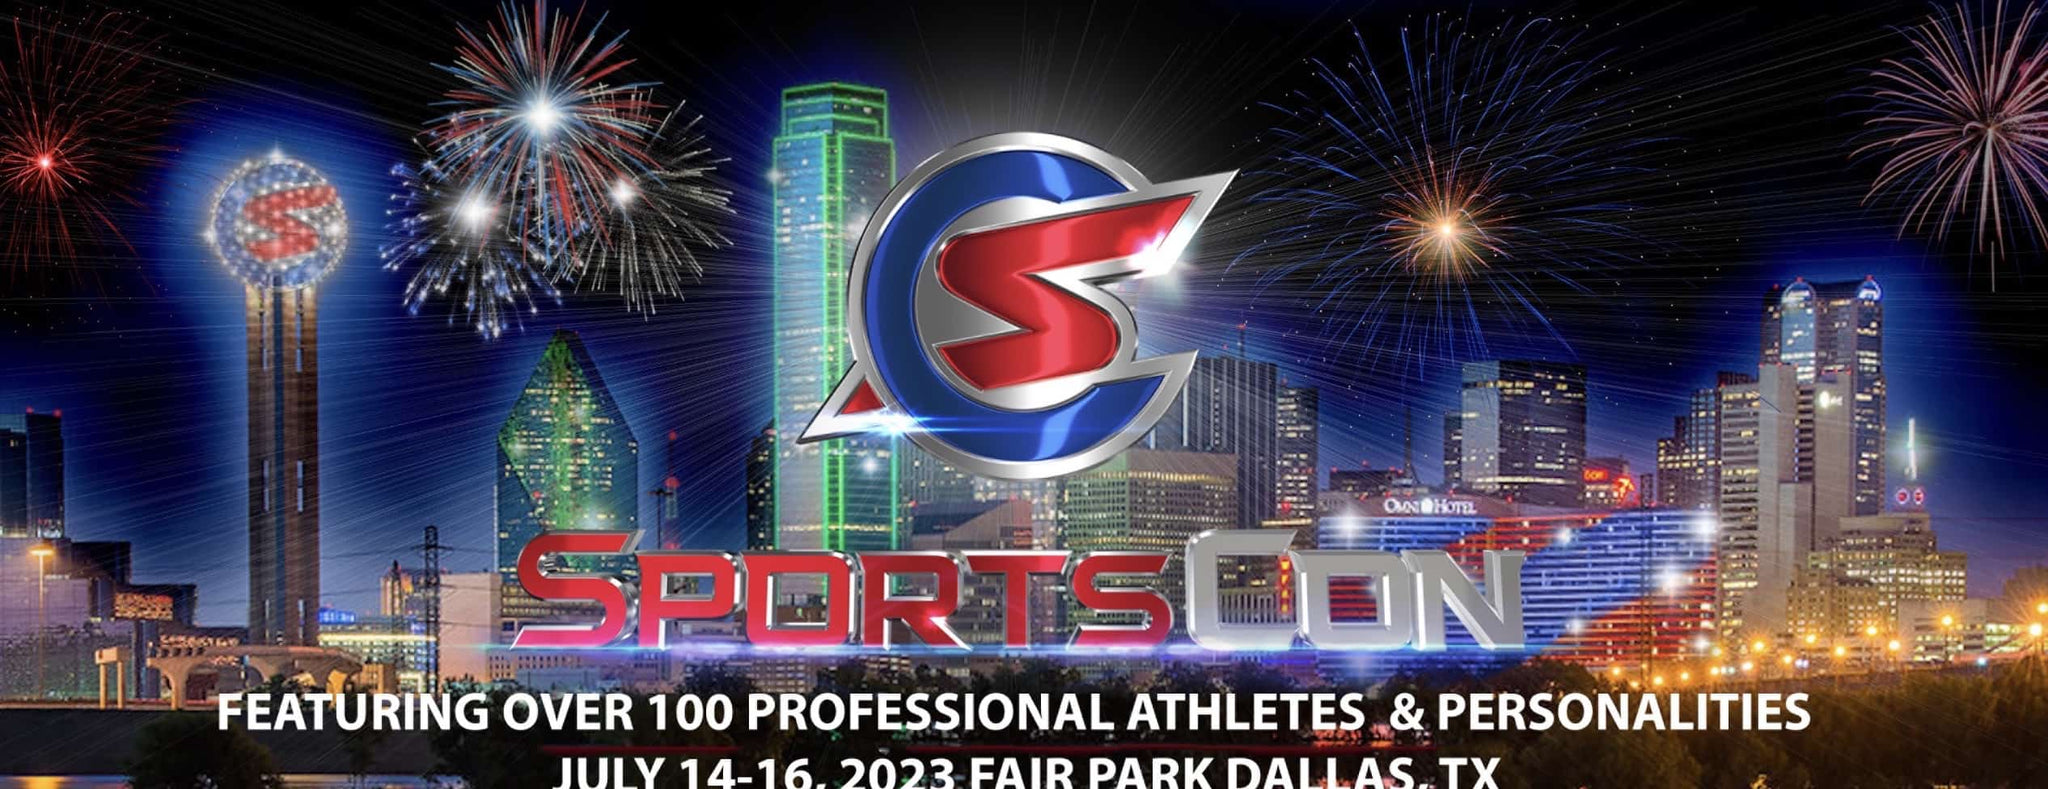 Enhance Your Performance with Slam Fuel at SportsCon Dallas 2023!